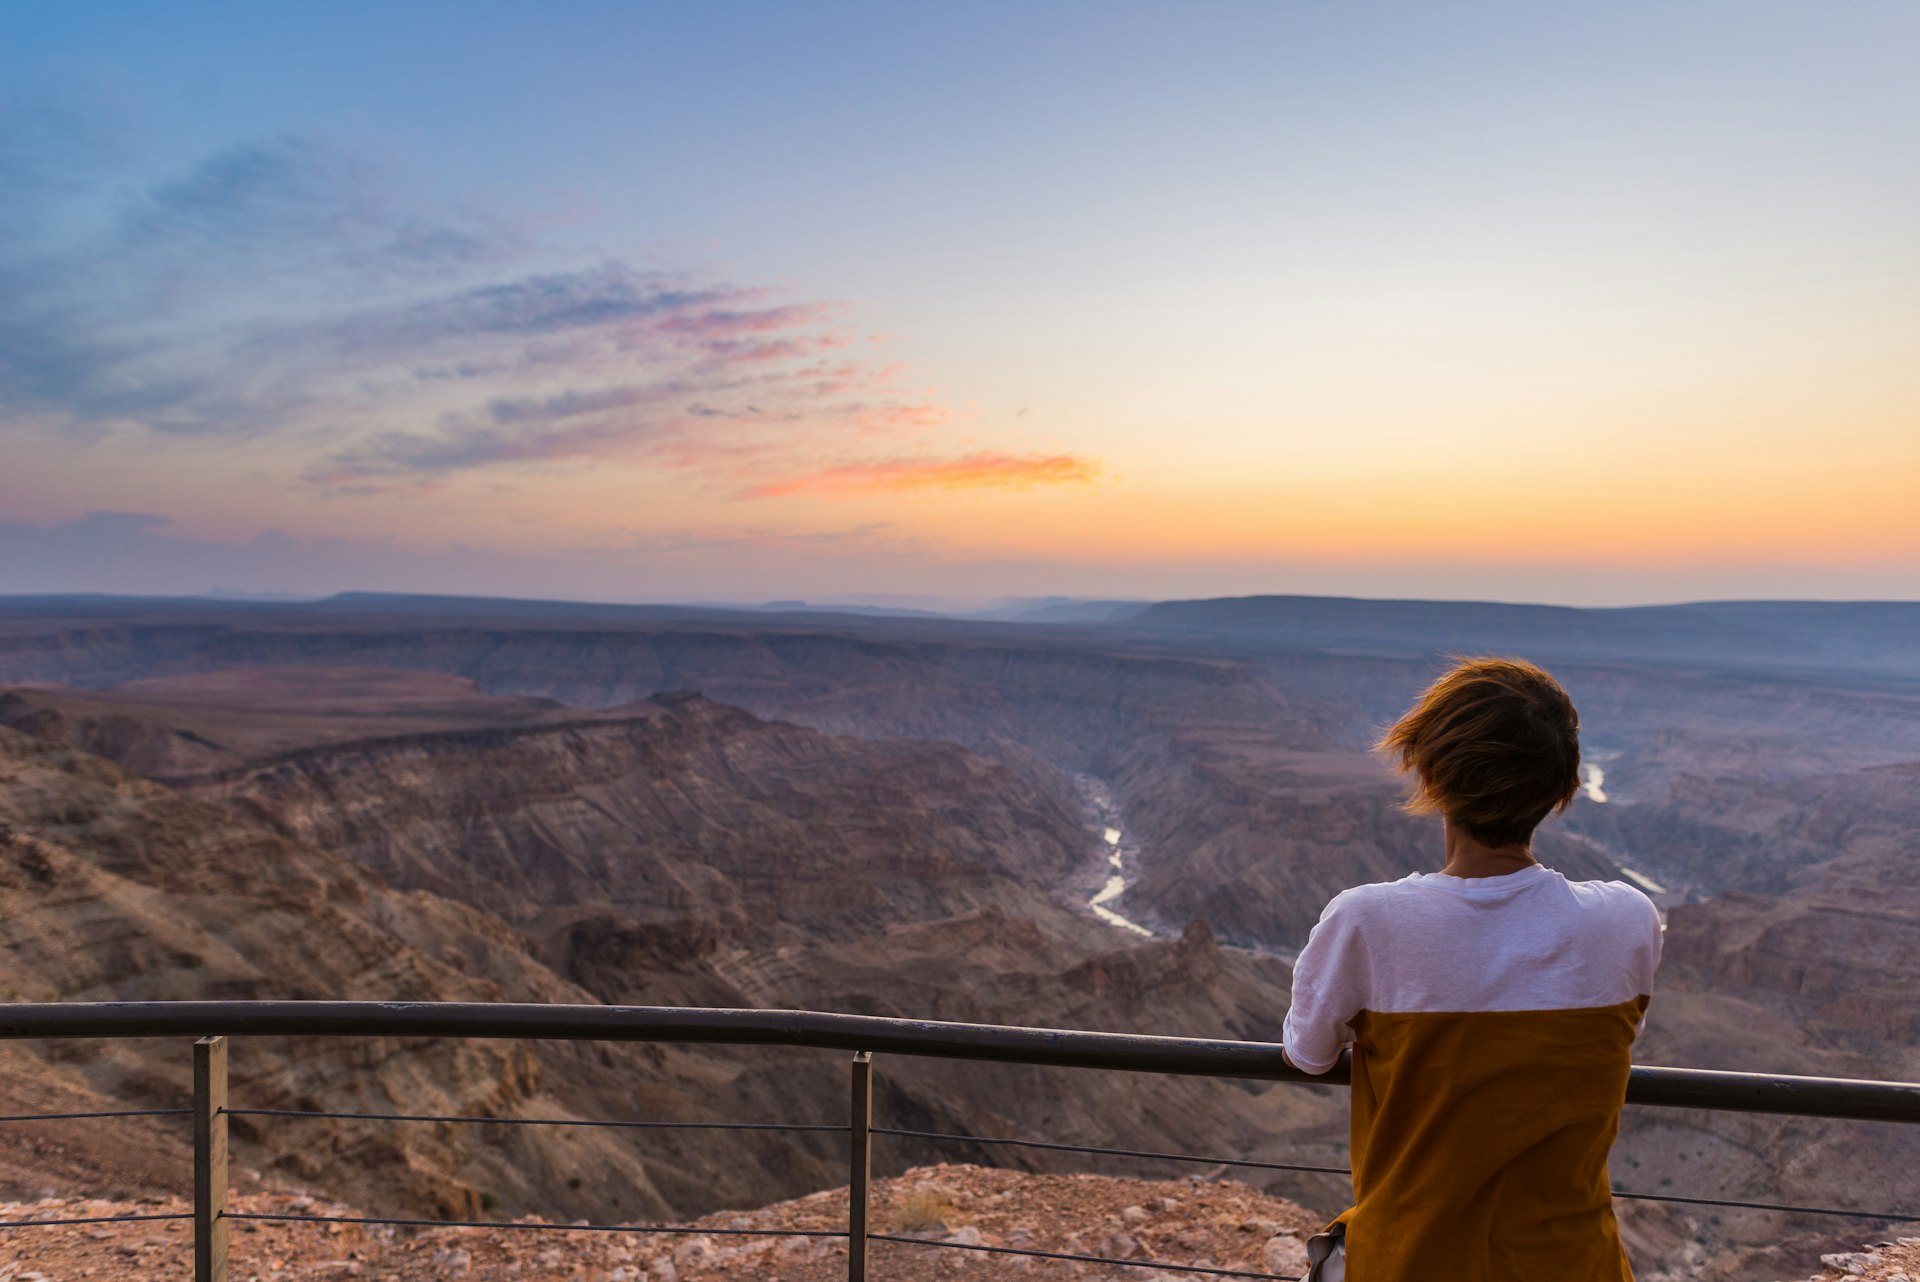 A wide-angle view of a tourist at sunset looking at the Fish River Canyon, Namibia